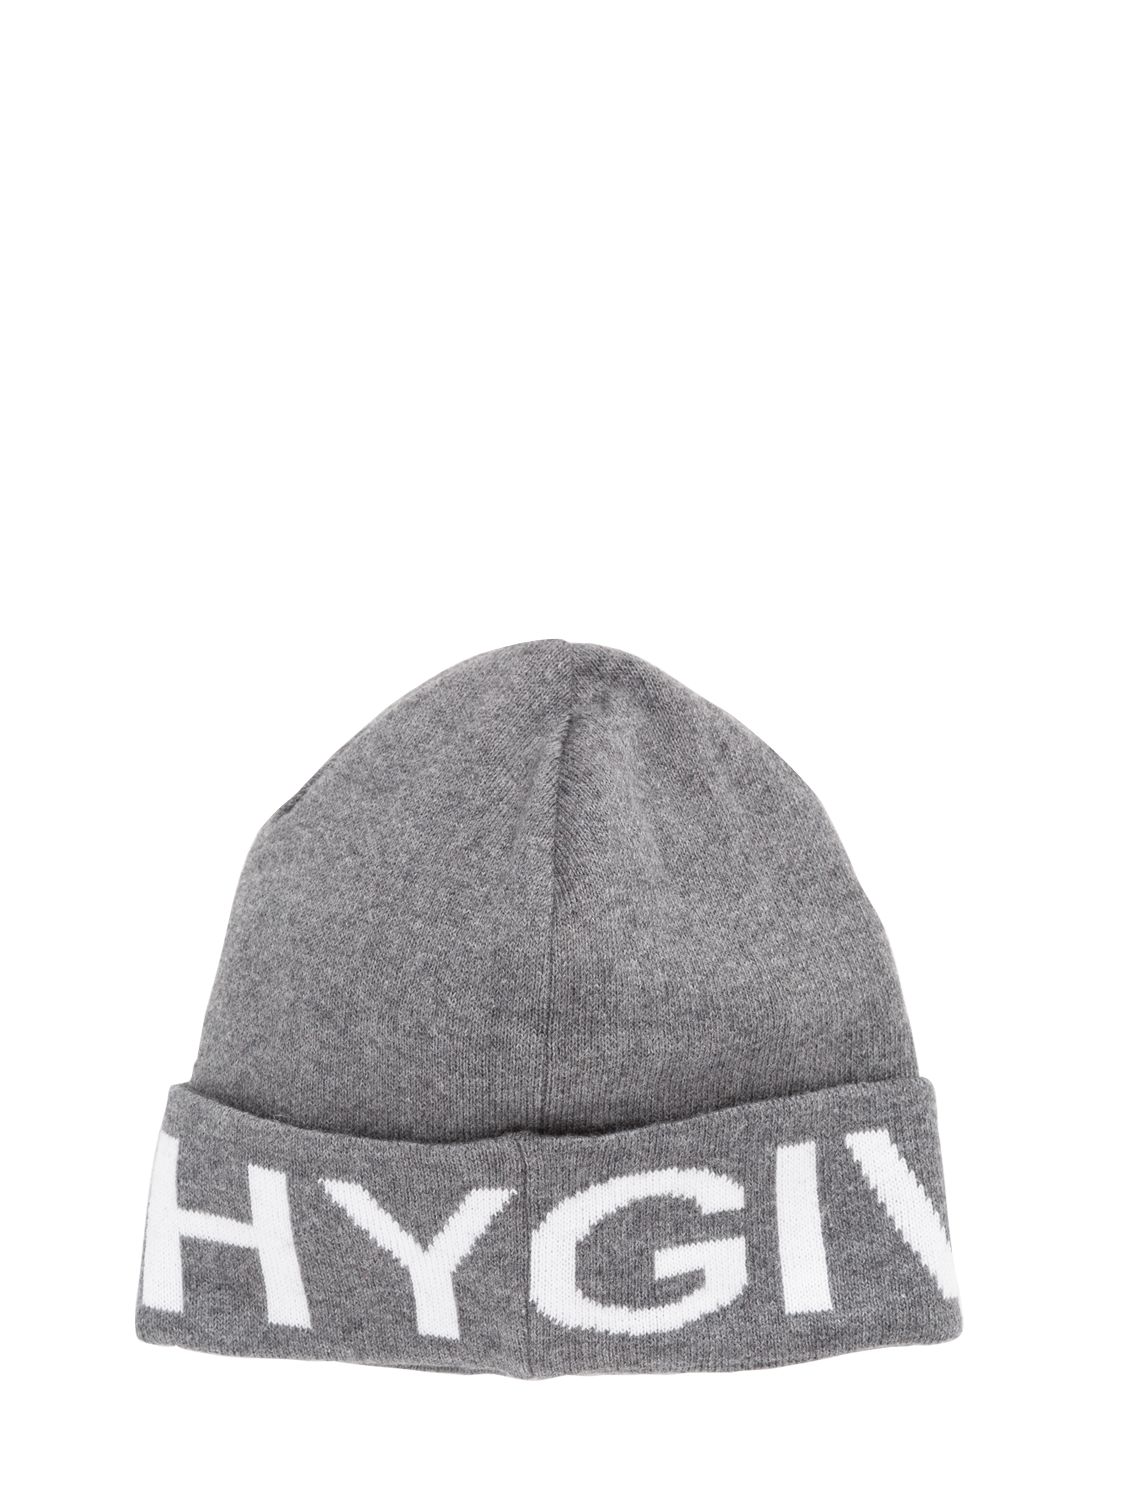 Givenchy Logo Intarsia Cotton Blend Beanie Hat In Grey